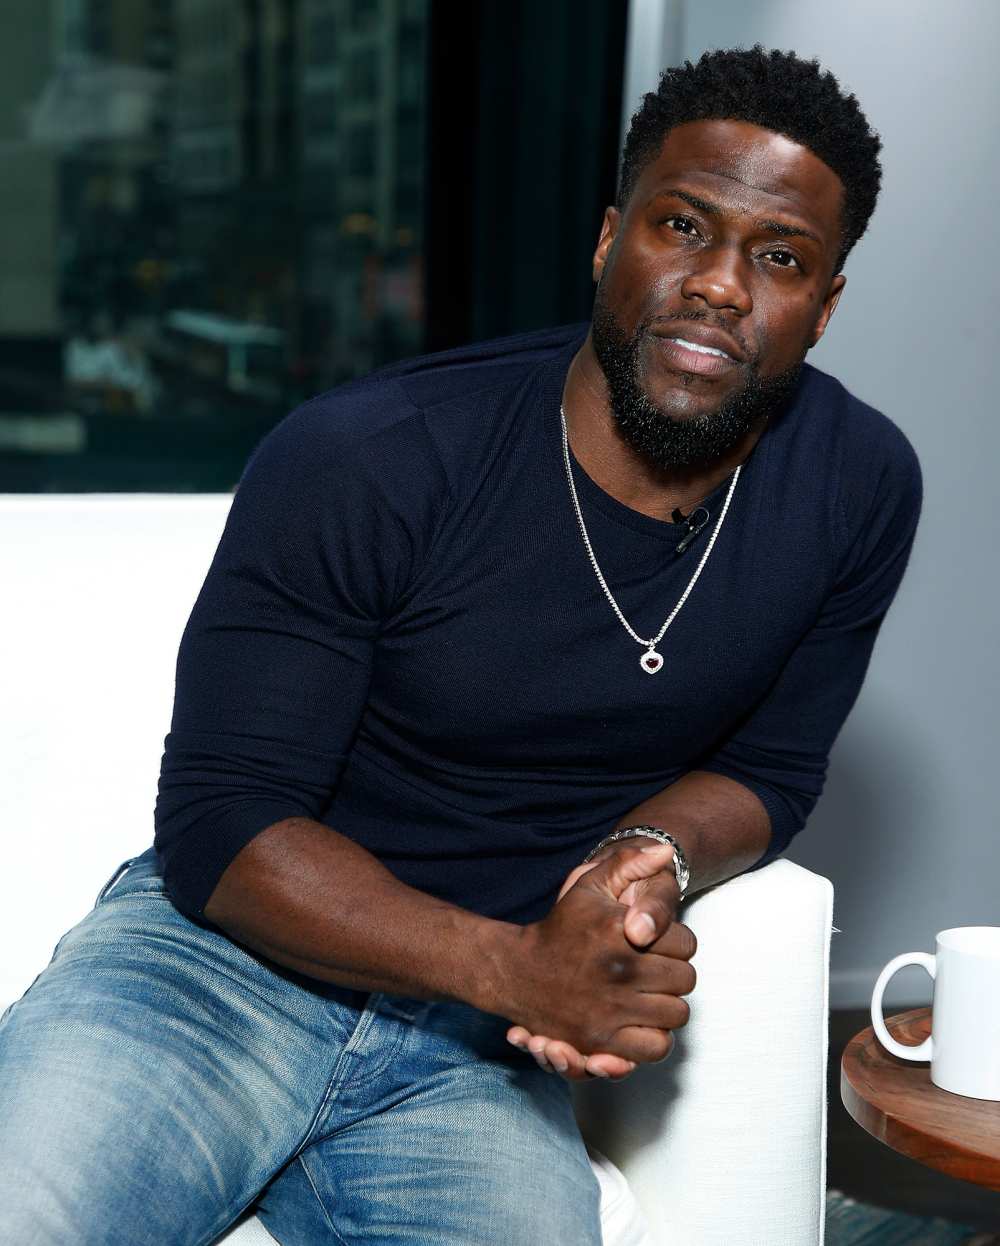 What Kevin Hart Is Doing Instead of Hosting the Oscars 2019